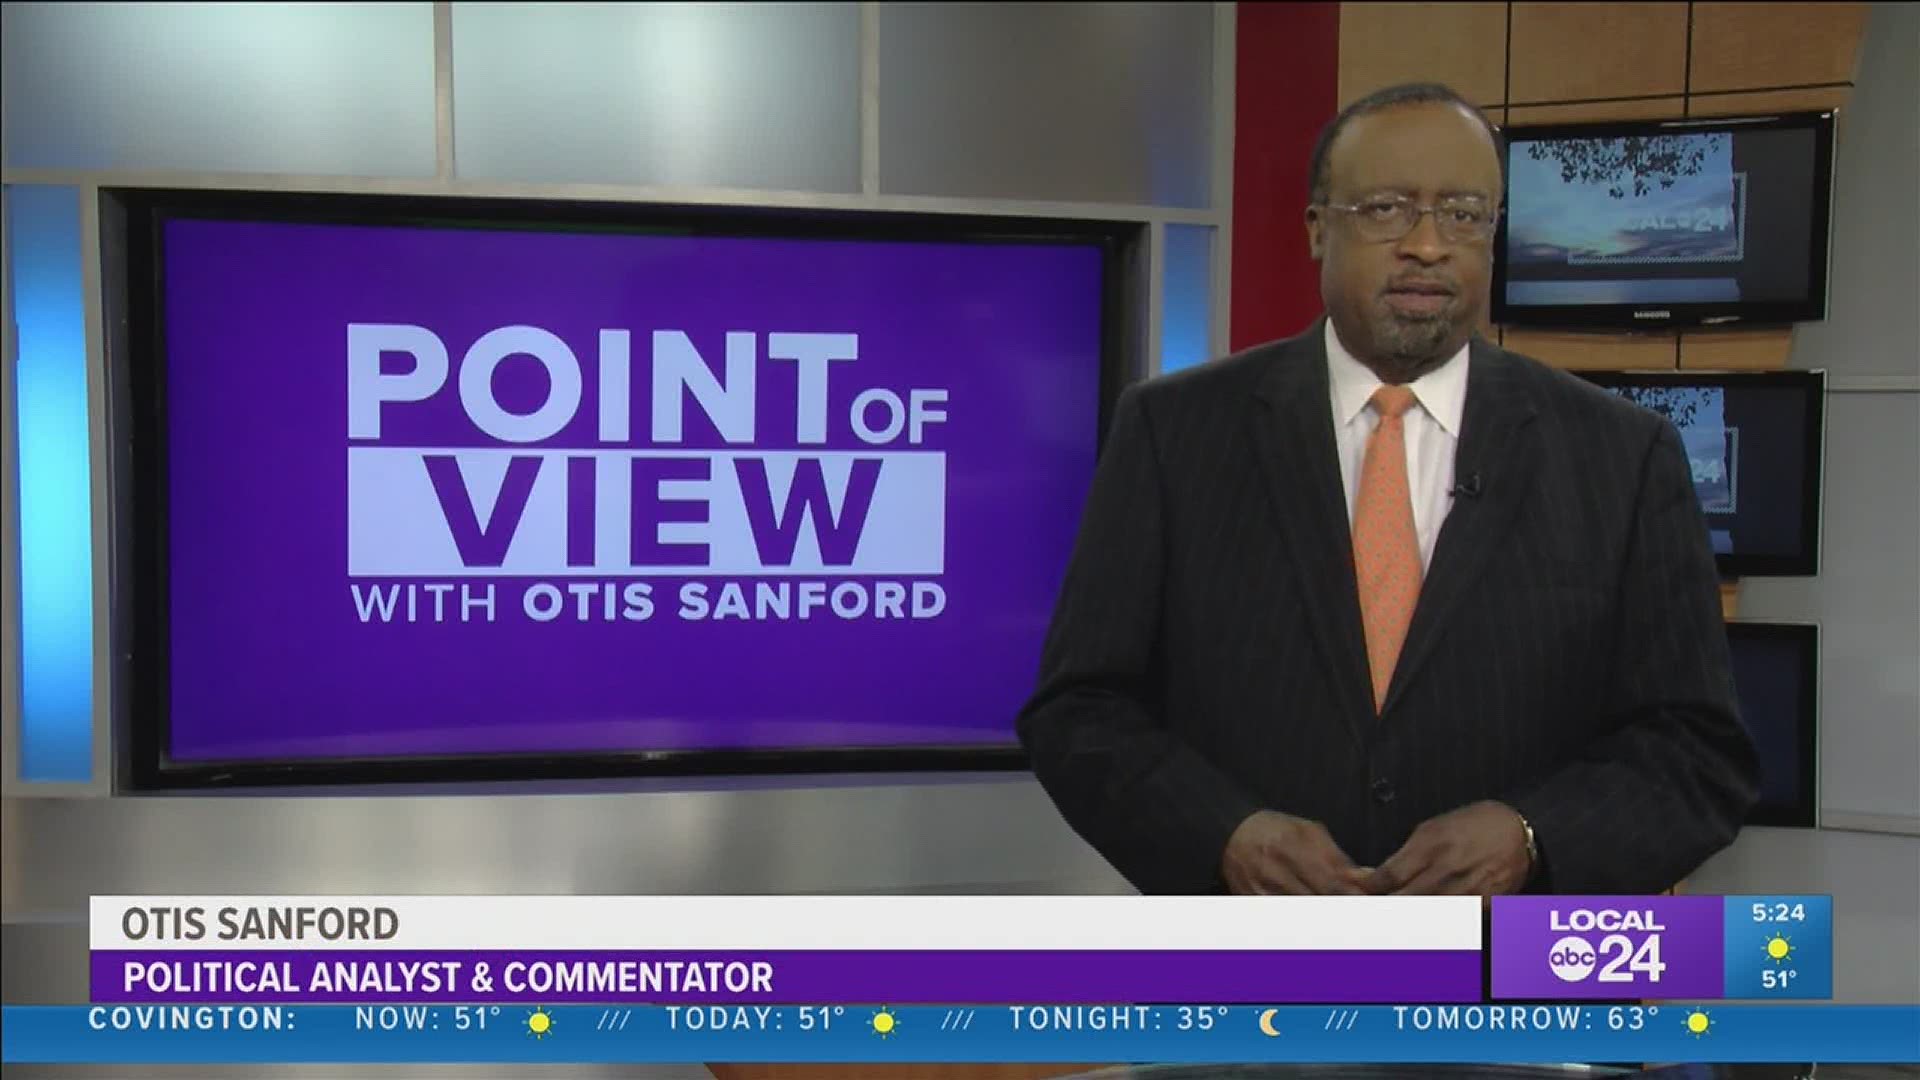 Local 24 News political analyst and commentator Otis Sanford shares his point of view on MLGW’s water woes.